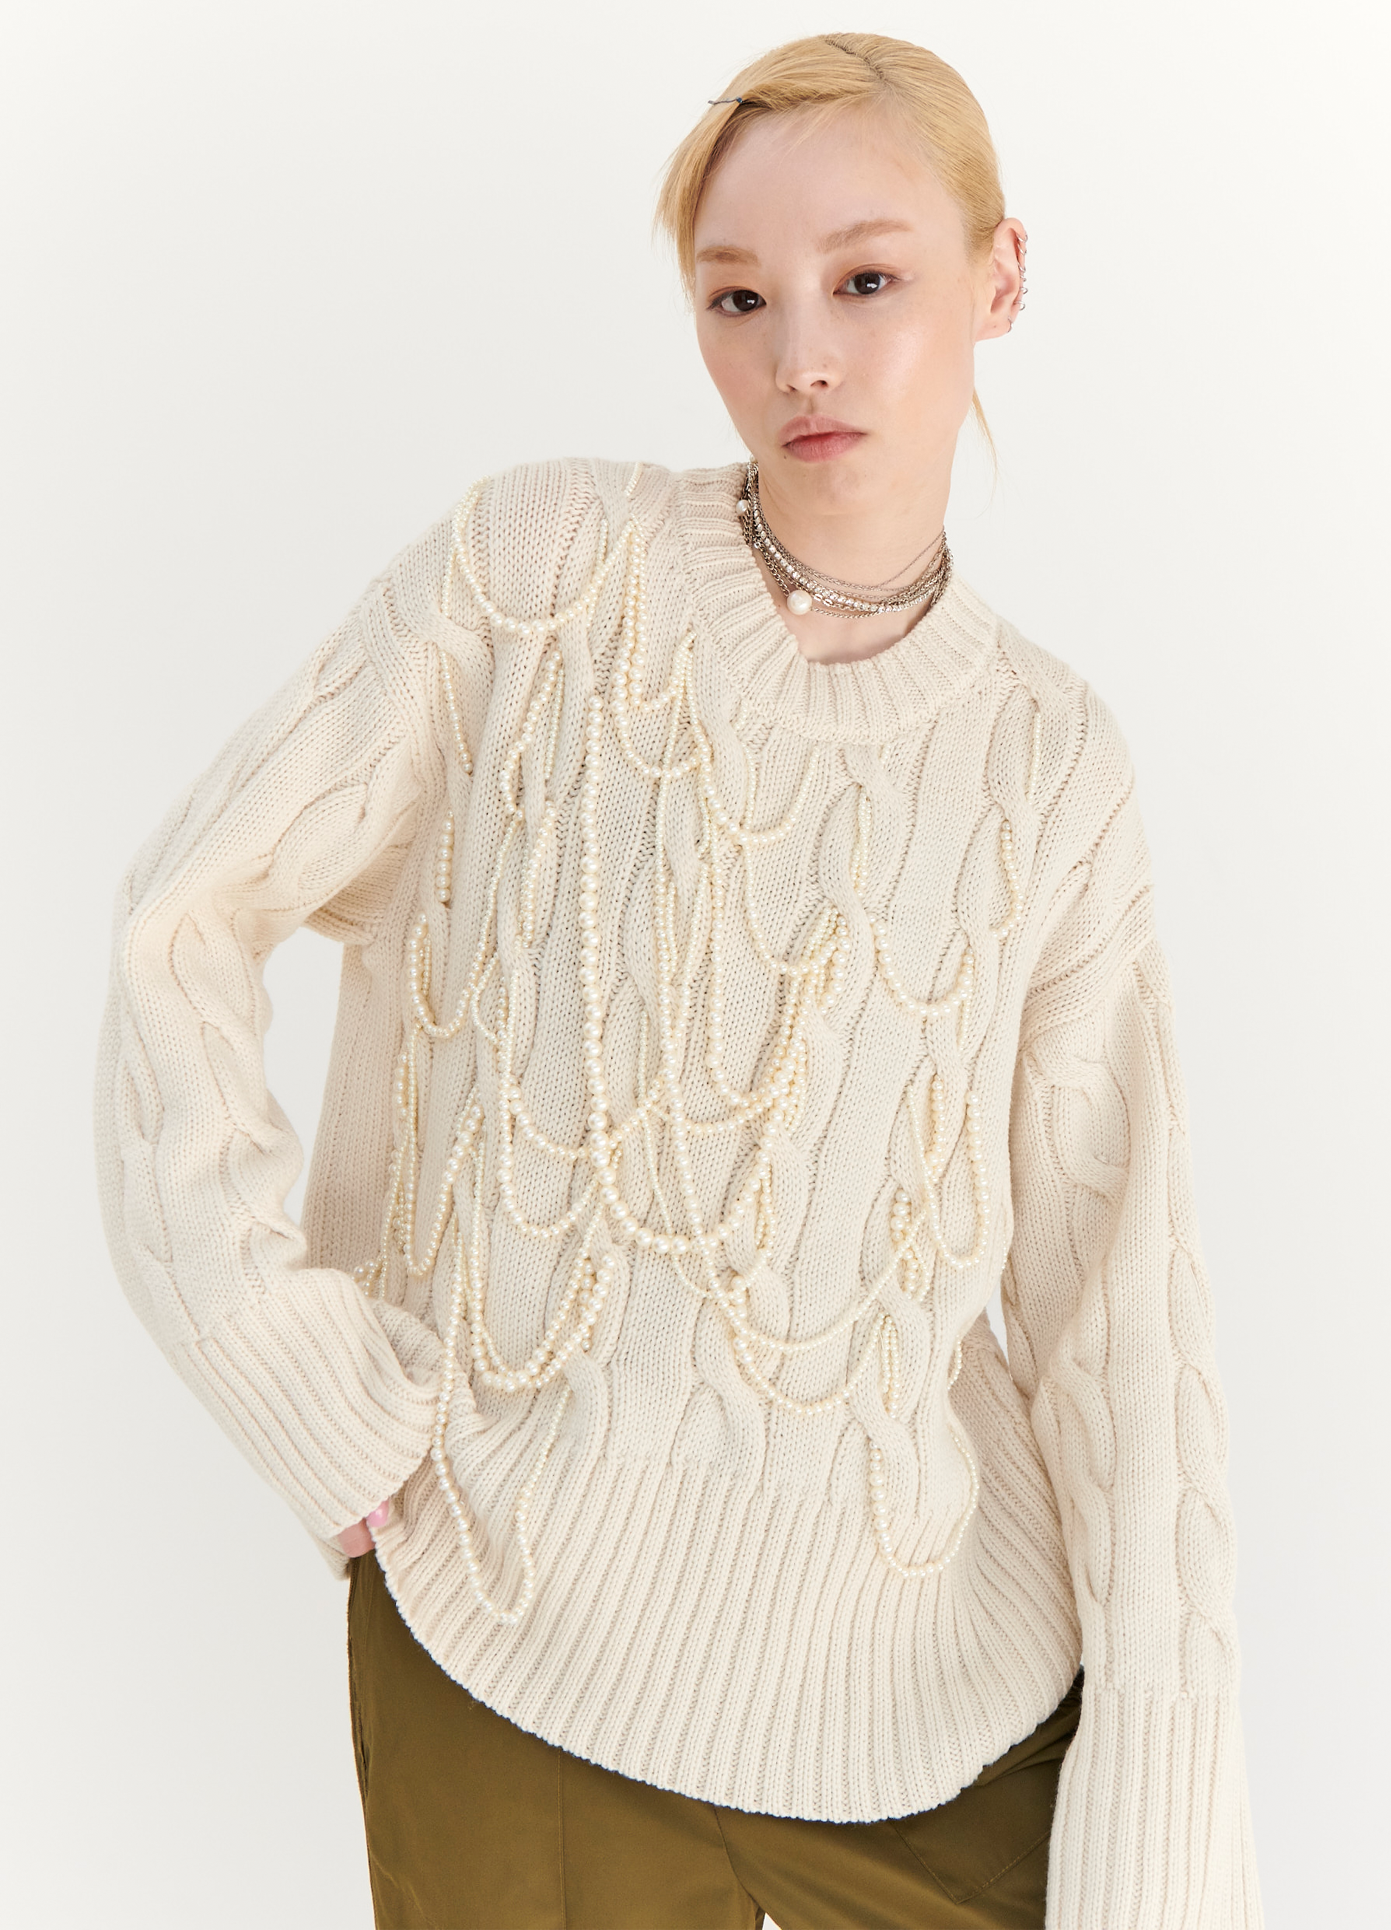 MONSE Pearl Detail Sweater in Ivory on model front view